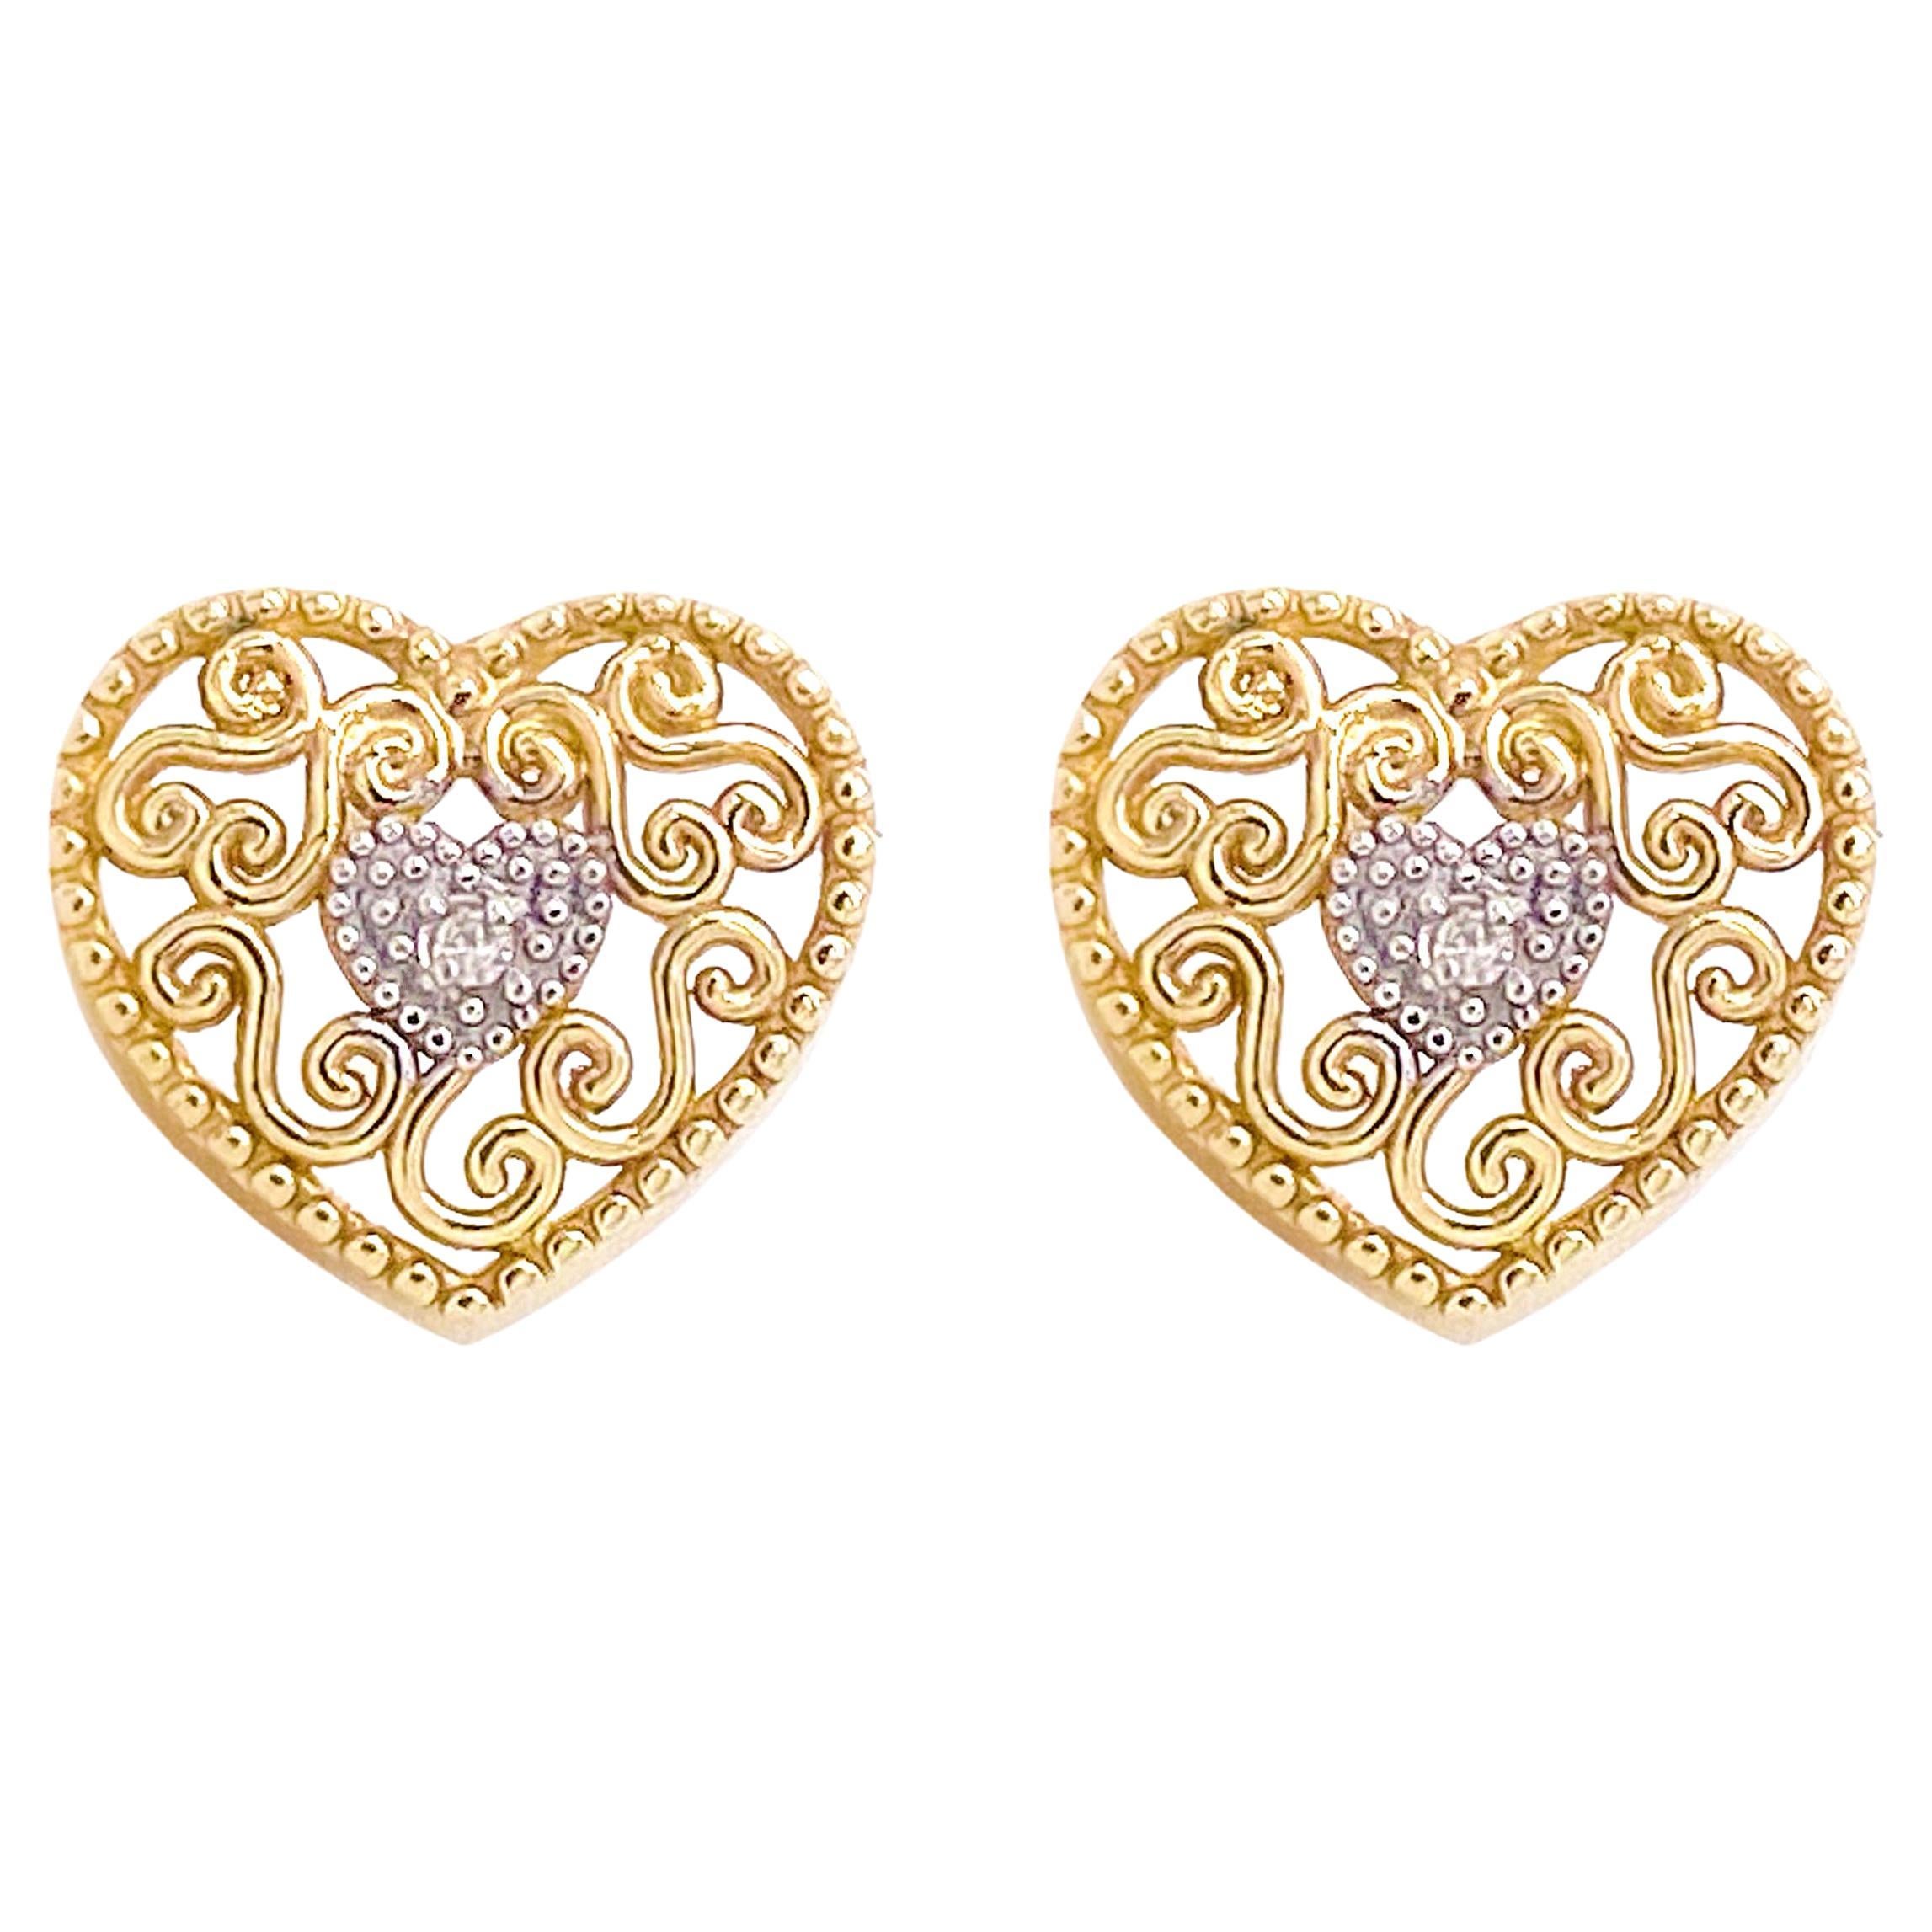 Diamond Heart Stud Earrings, Yellow Gold and White Gold, Valentine's, Love For Sale